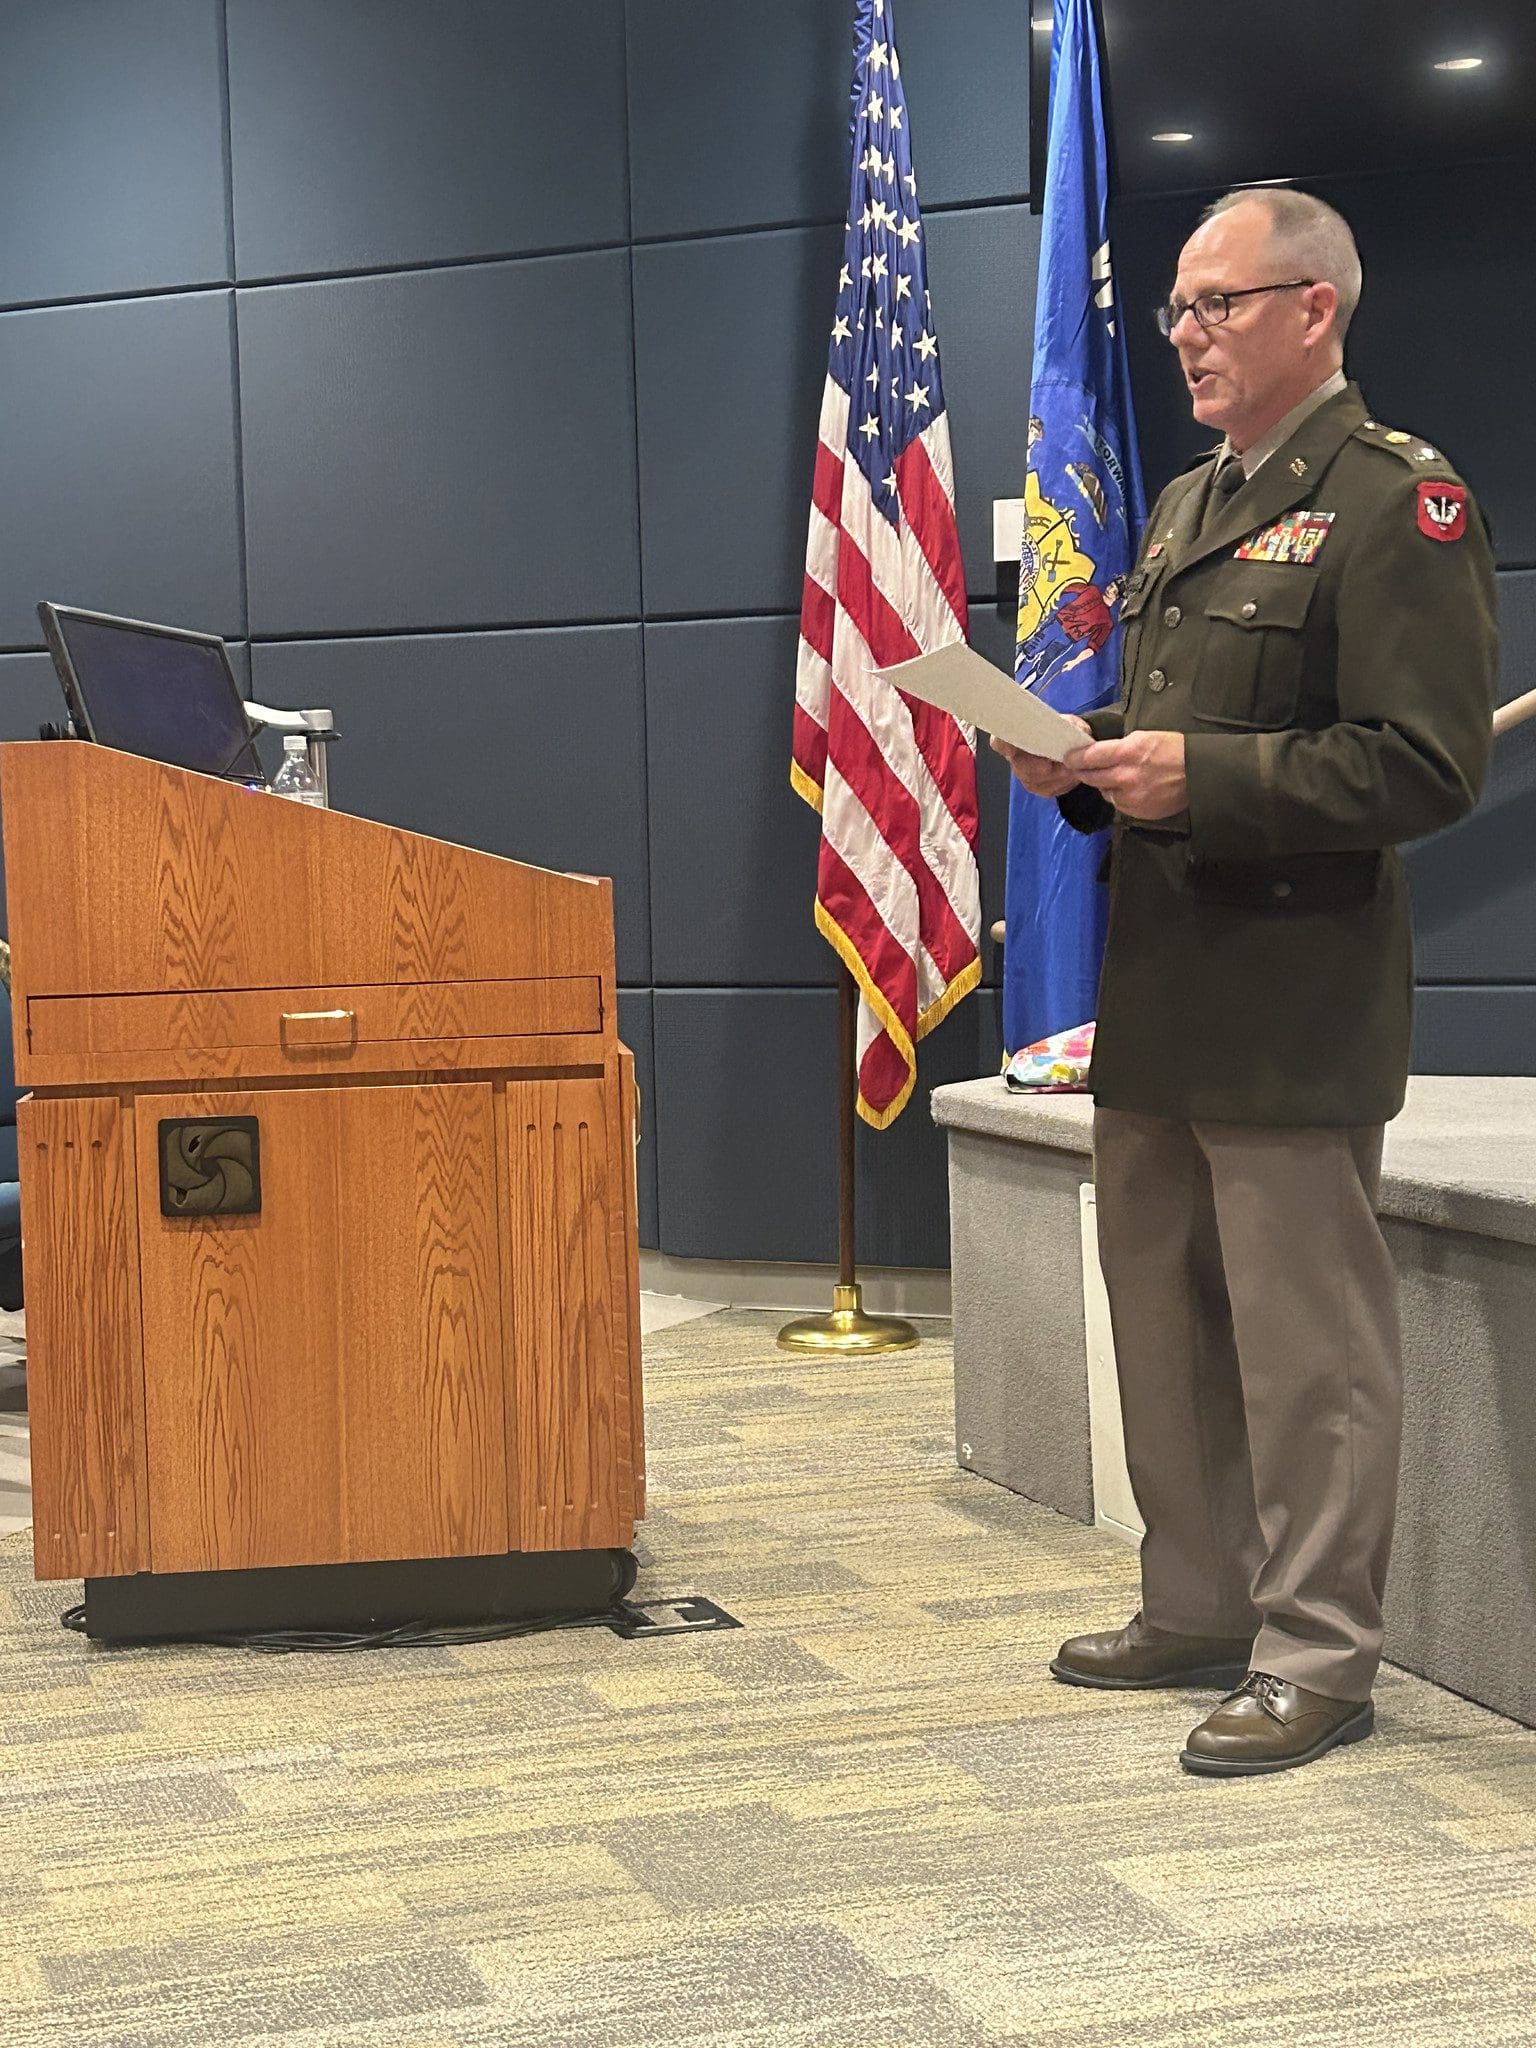 Command Chief Warrant Officer Charles Mattison speaks during his July 12 promotion ceremony in Joint Force Headquarters’ Witmer Hall in Madison, Wis. Wisconsin National Guard photo by Staff Sgt. Alice Ripberger